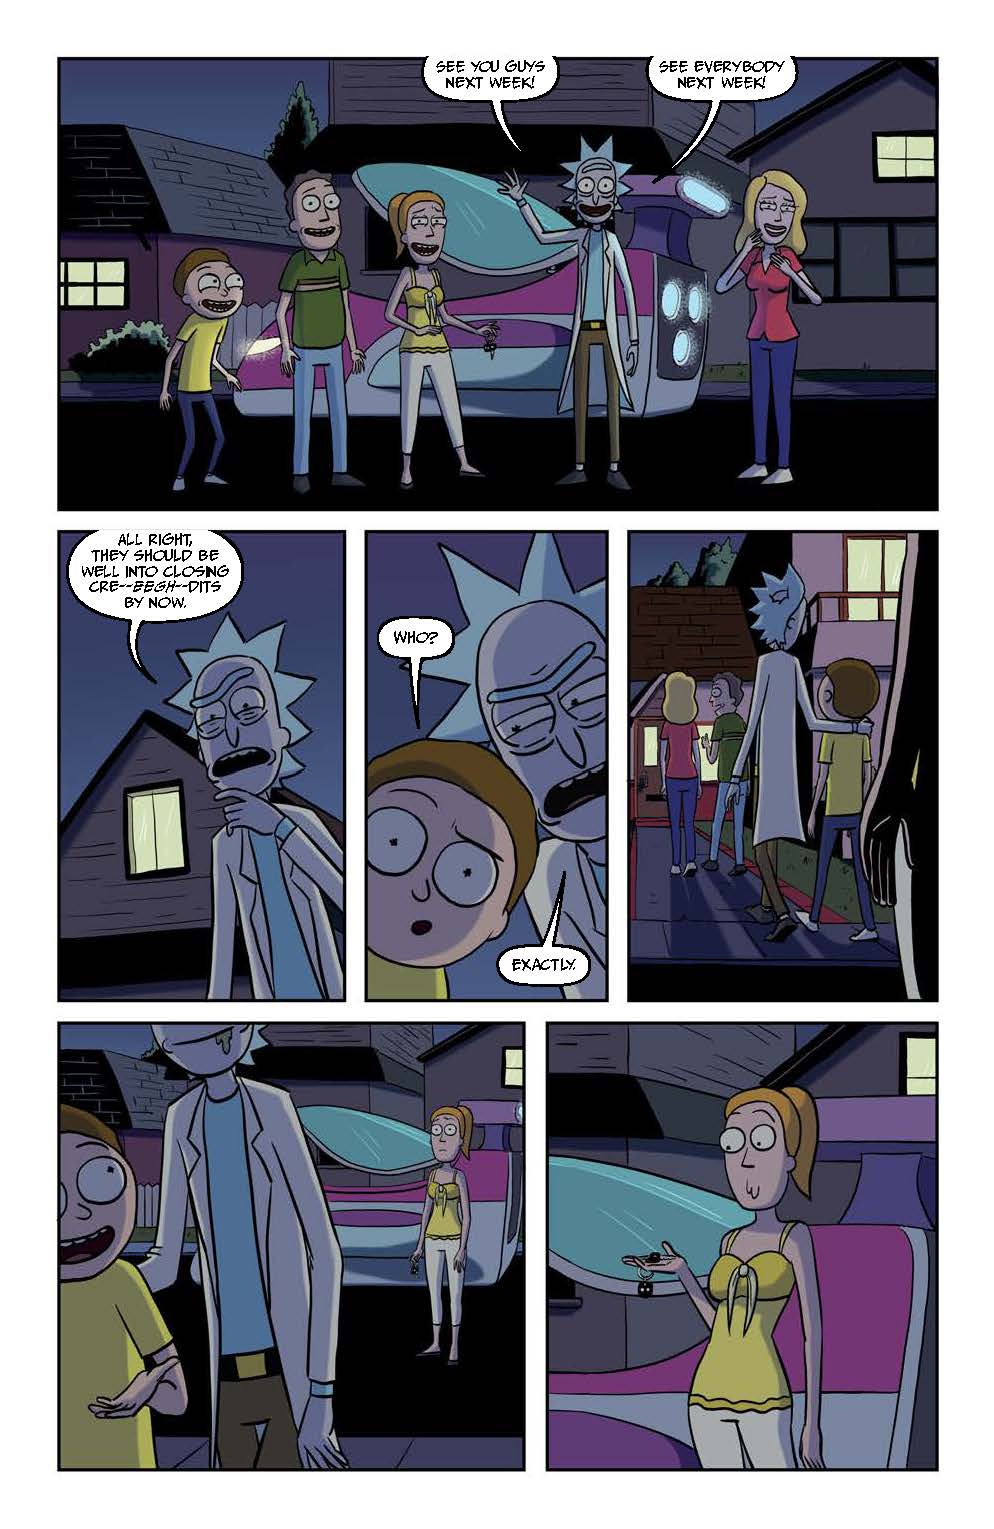 Preview RICKMORTY #32 MARKETING copy_Page_3